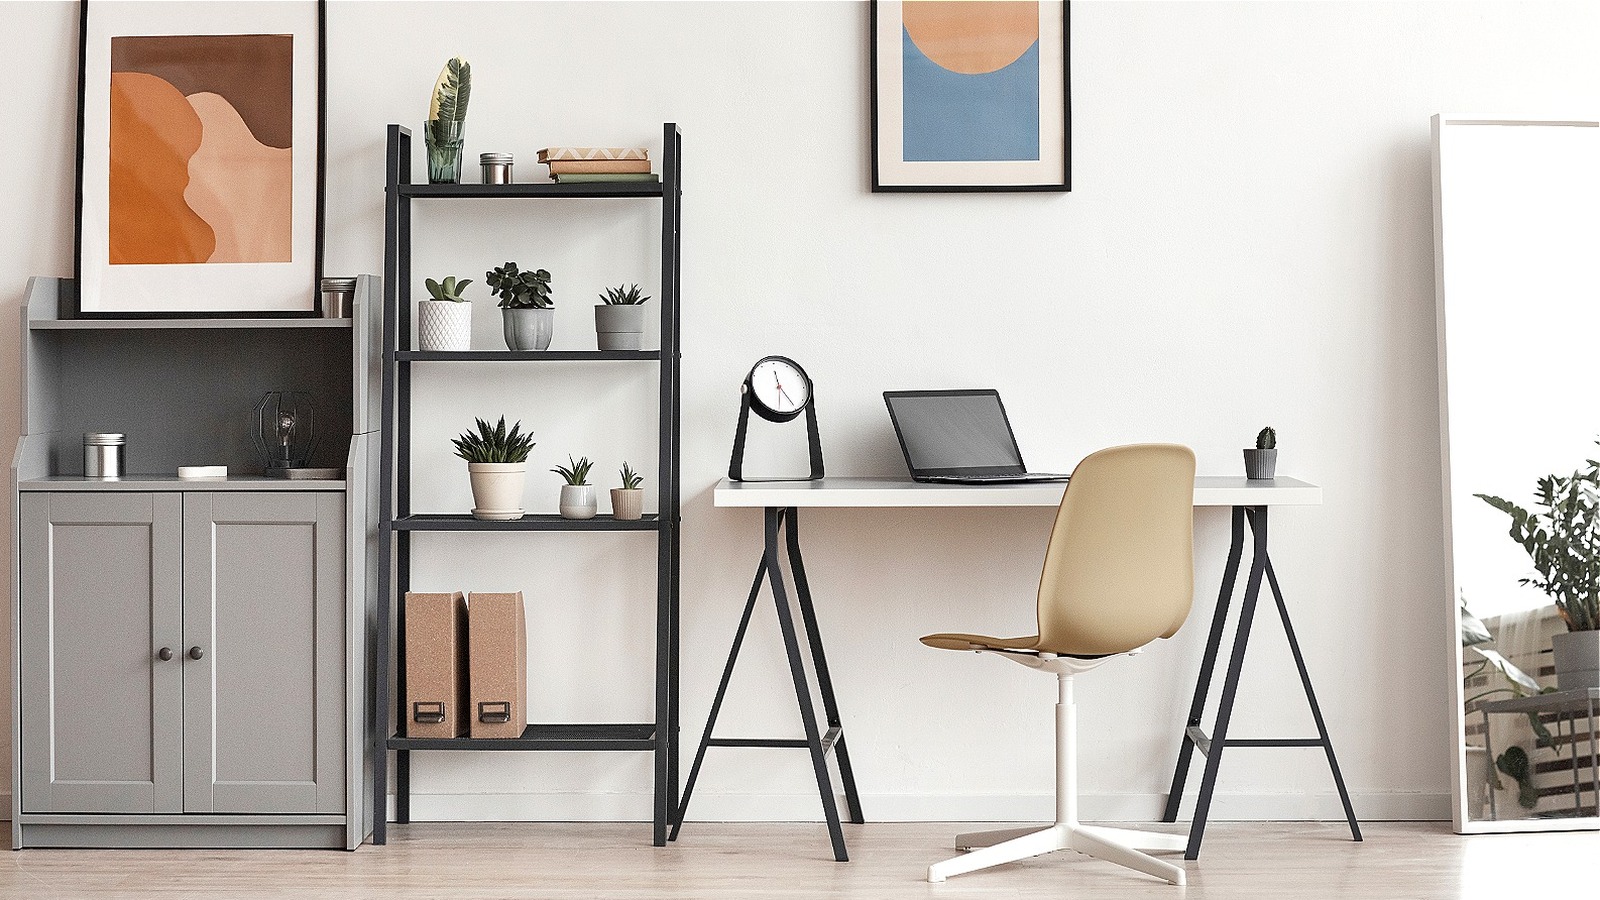 https://www.housedigest.com/img/gallery/how-the-right-color-desk-can-add-good-feng-shui-to-your-home-office/l-intro-1678037091.jpg